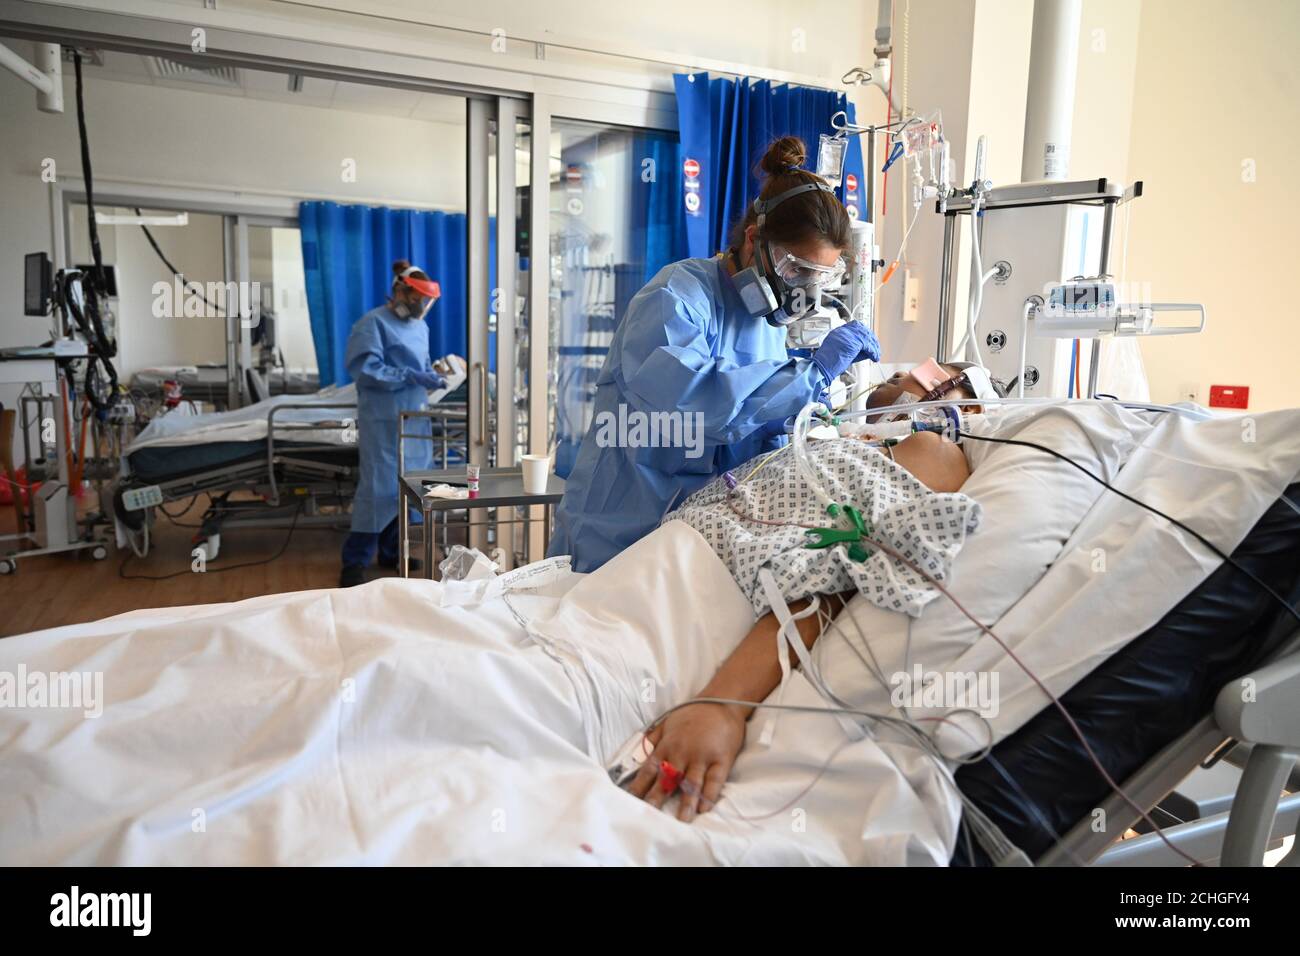 Clinical staff wear Personal Protective Equipment (PPE) as they care for a patient at the Intensive Care Unit at the Royal Papworth Hospital in Cambridge. Stock Photo